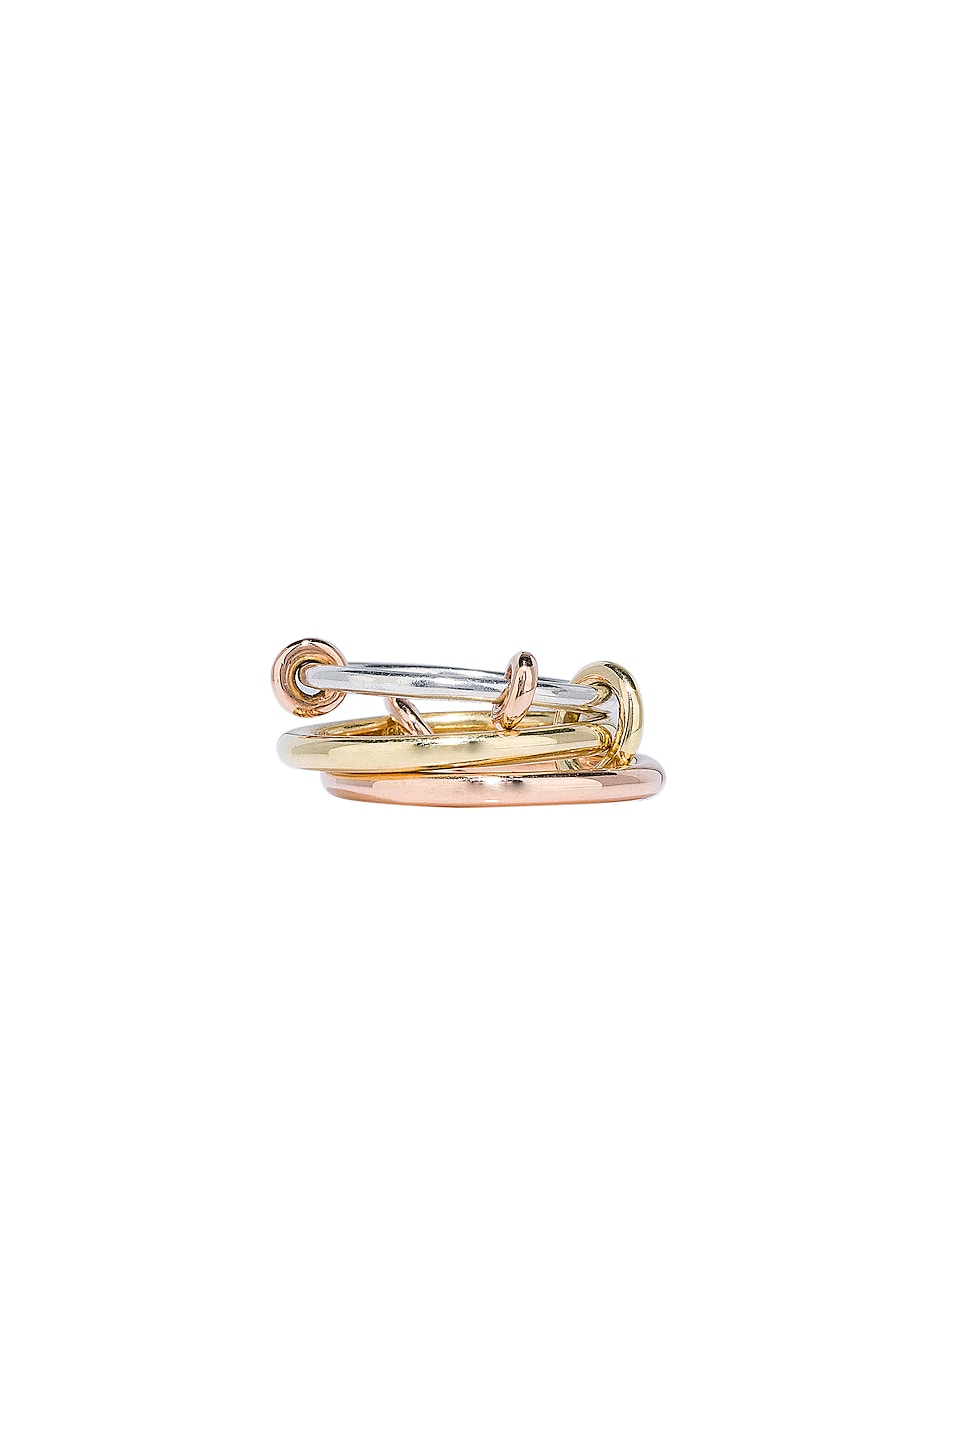 Image 1 of Spinelli Kilcollin Raneth MX Ring in Sterling Silver, 18K Rose Gold, and 18K Yellow Gold